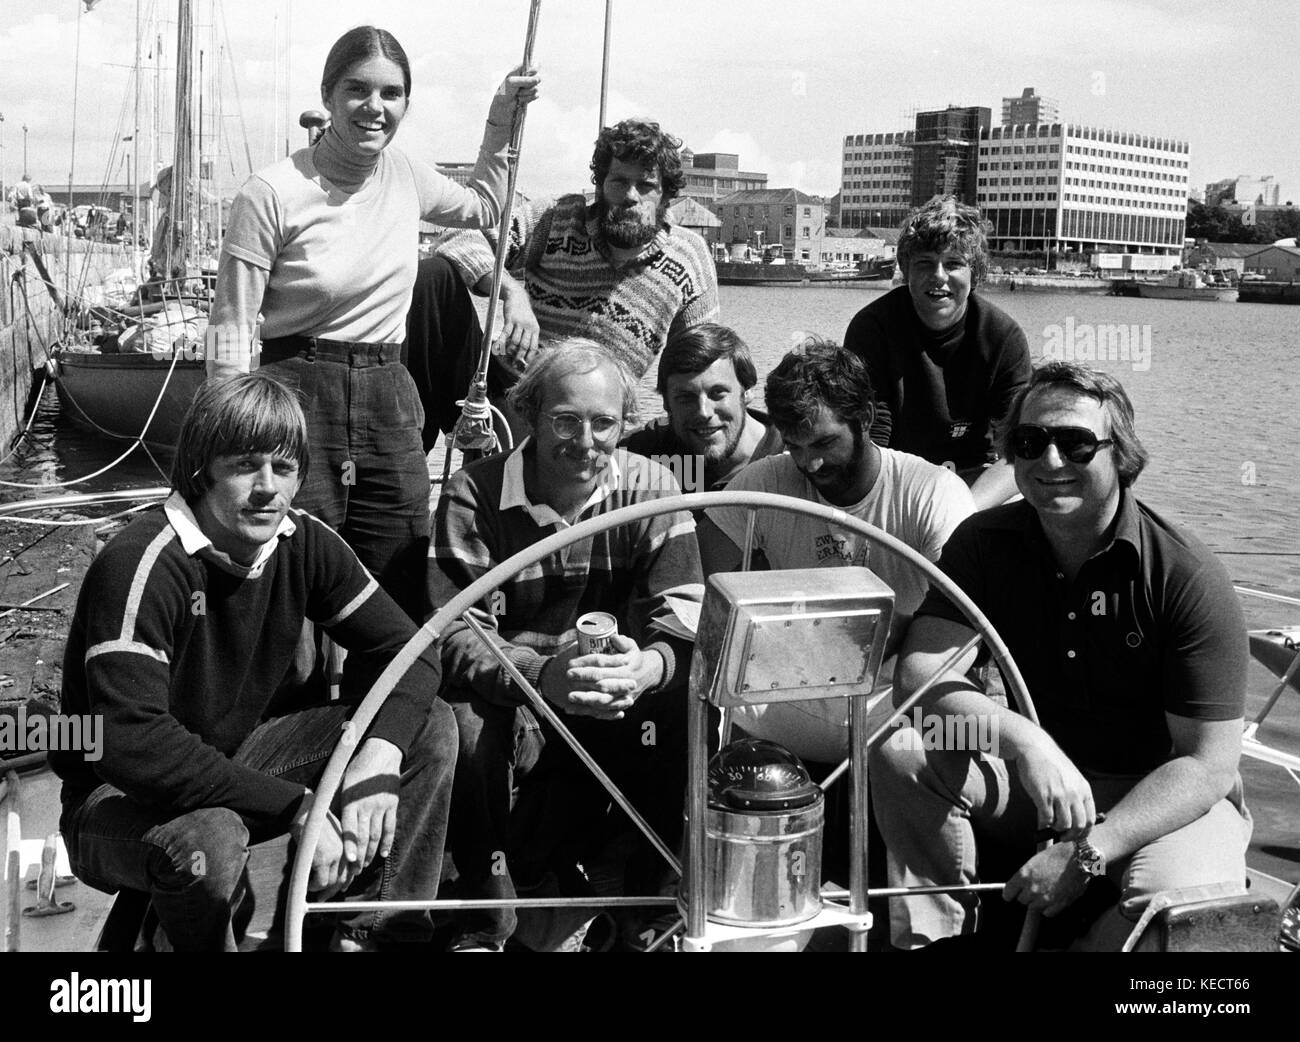 AJAXNETPHOTO. 17th AUGUST, 1979. PLYMOUTH, ENGLAND. - FASTNET RACE END -  CREW OF AMERICAN YACHT TENACIOUS POSE FOR GROUP PHOTO IN MILLBAY DOCKS AT END OF 605 MILE RACE THAT CLAIMED 15 LIVES OF RACE PARTICIPANTS IN STORM; (L-R, FRONT), GREG SHIRES OF CHICAGO, BUD SUTHERLAND OF OHIO, RIVES POTTS OF RICHMOND VA., JIM MATTINGLY OF GREENWICH CT, (STANDING BACK.) JANE POTTS OF CHARLOTTTSVILLE, JOHN SAMAMA OF WAGENINGEN (NETH), TEDDY TURNER (16) FROM ATLANTA AND TOM RELYEA (RIGHT, FRONT.) OF L.A. OWNER TED TURNER WAS NOT ON BOARD THE YACHT AT THIS TIME. PHOTO:JONATHAN EASTLAND/AJAX REF:791708 1 X Stock Photo